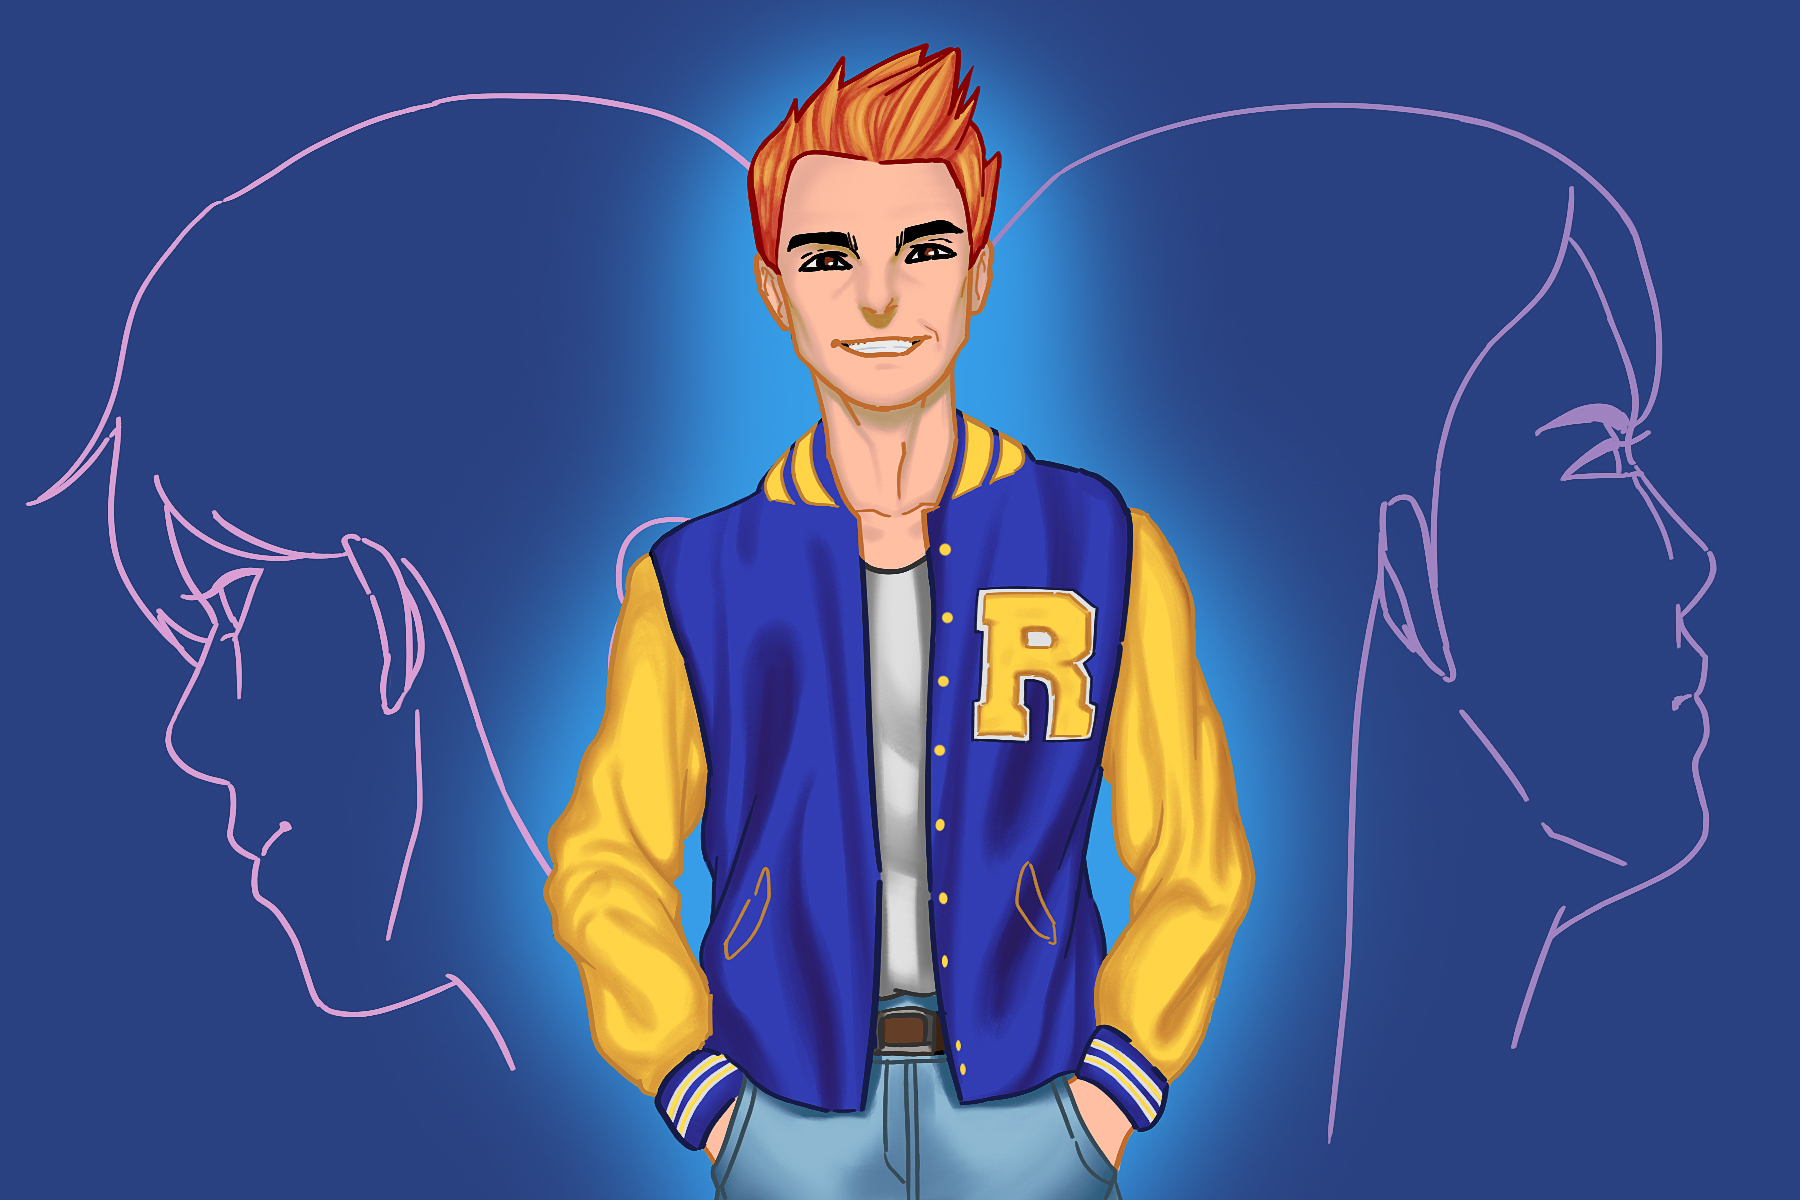 Illustration by Melchisedech Quagrainie for an article on Riverdale